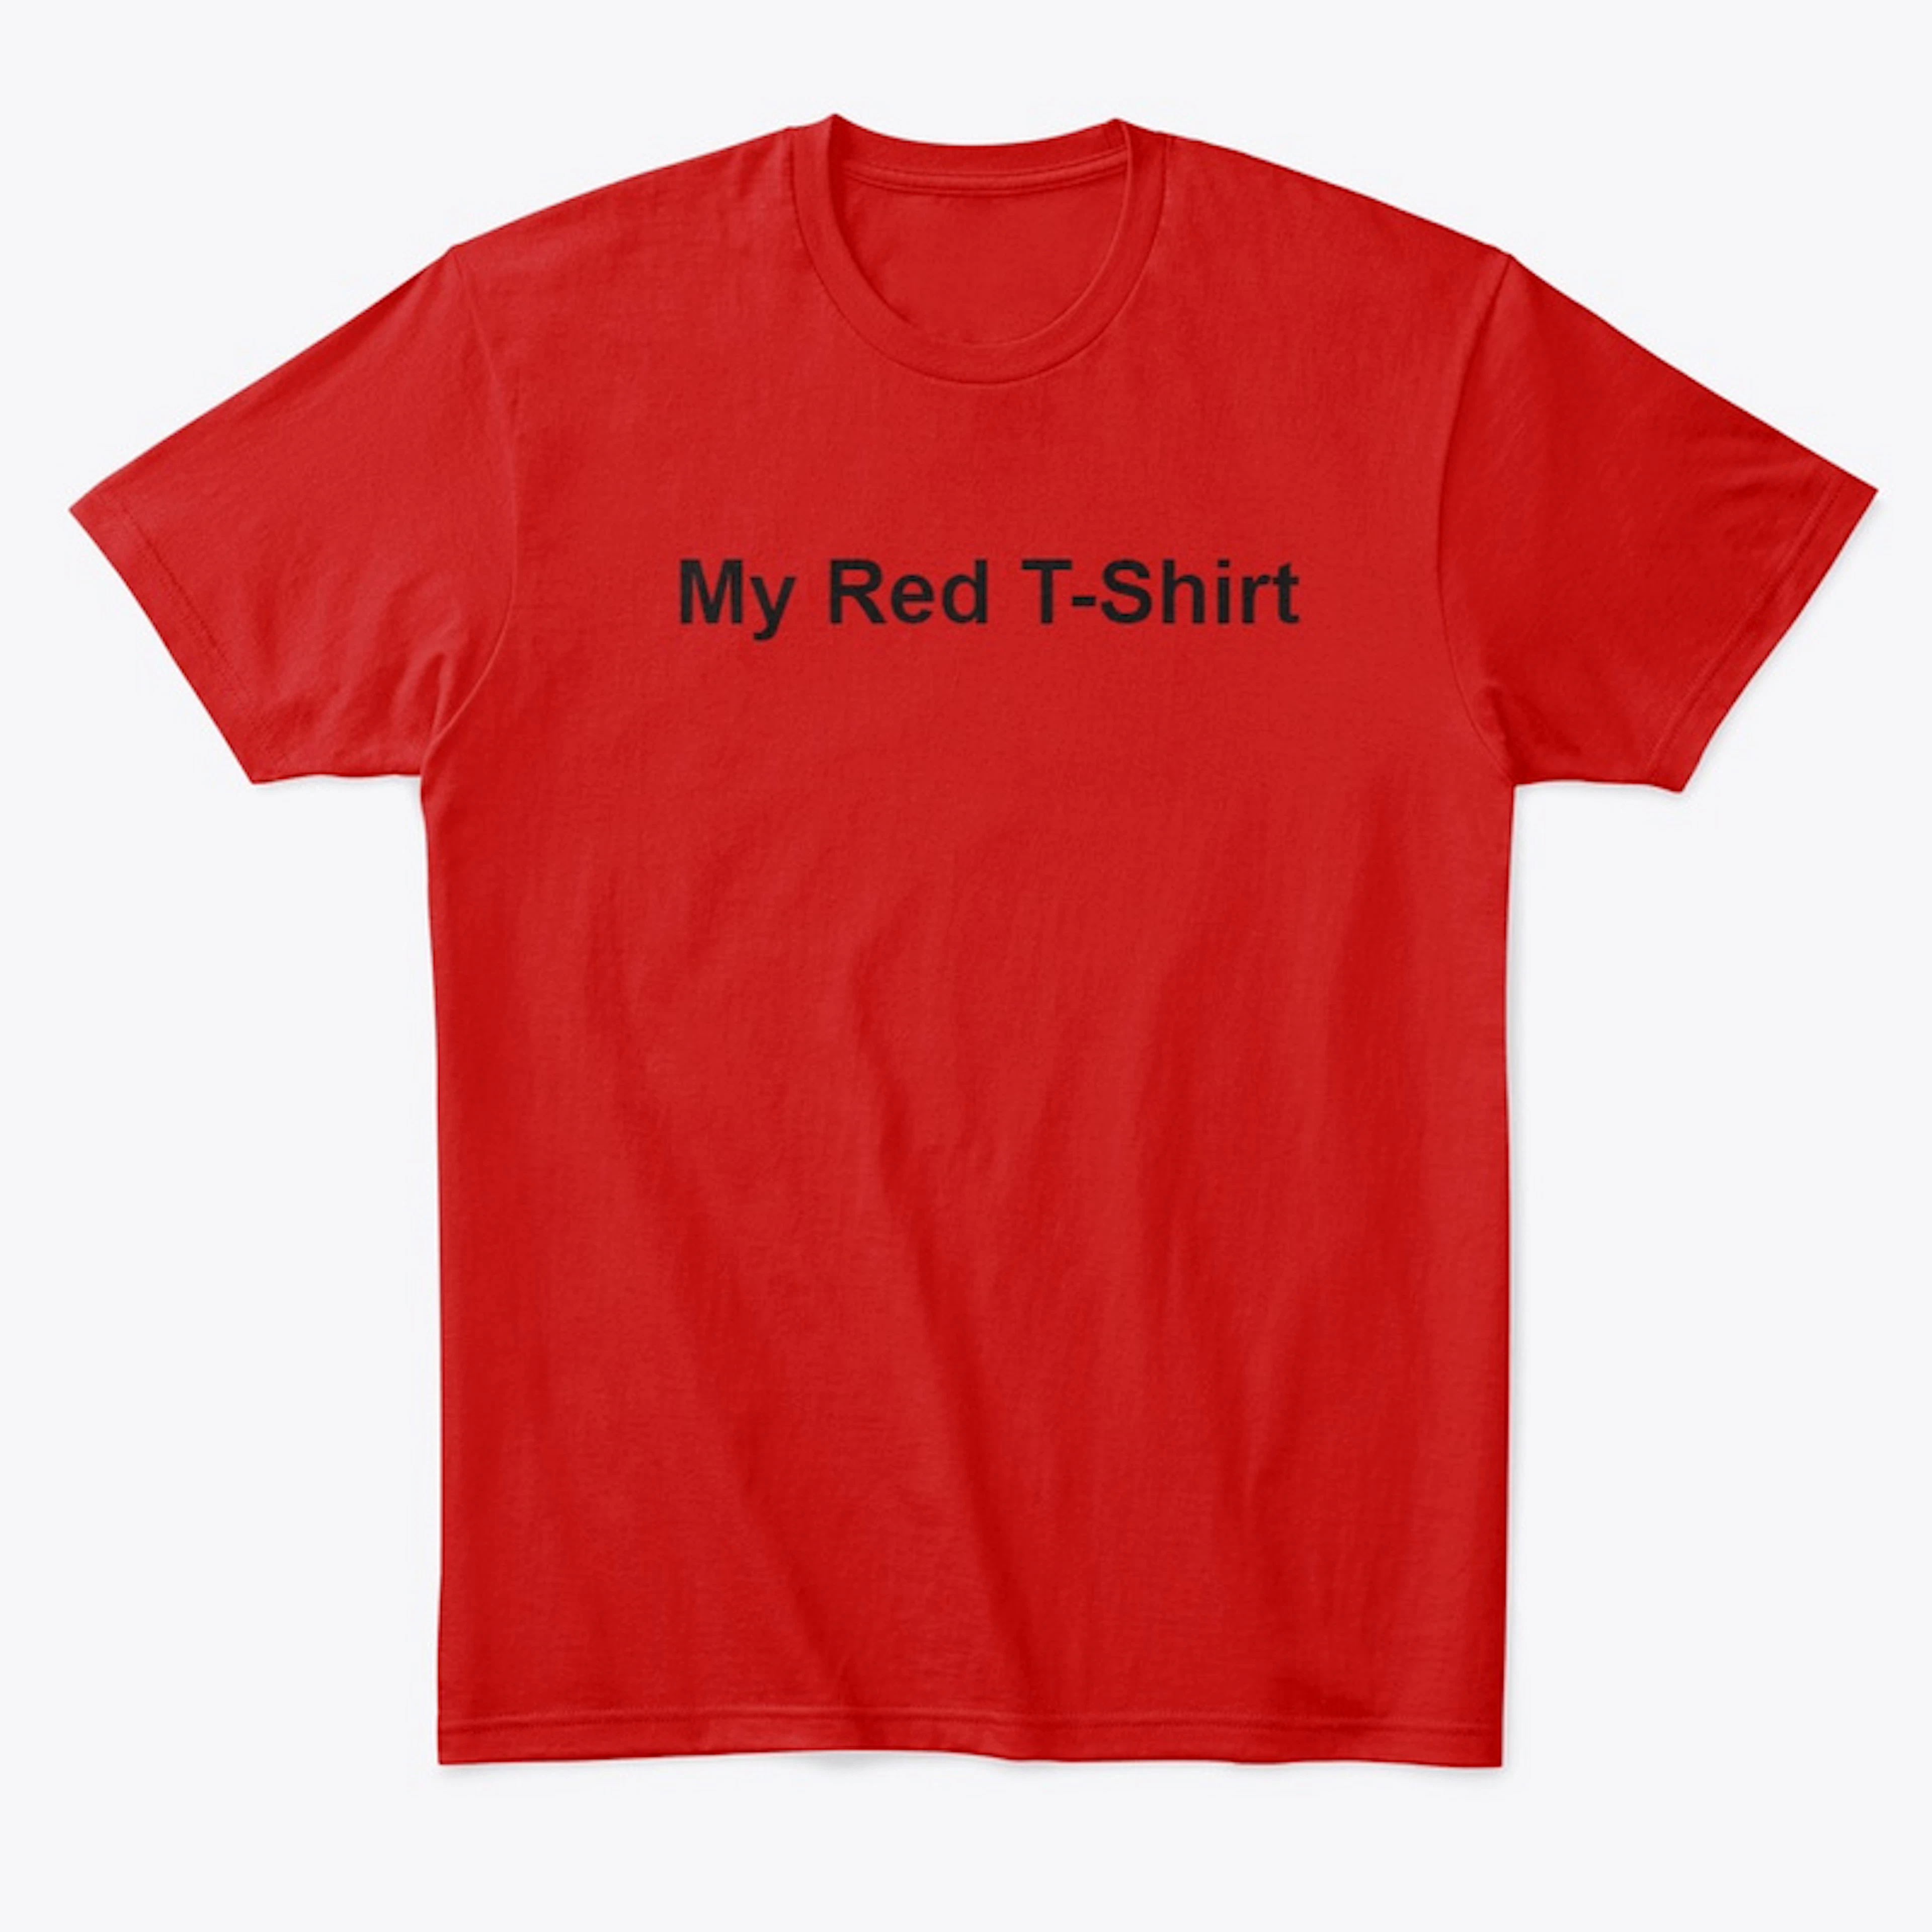 My Red T-Shirt